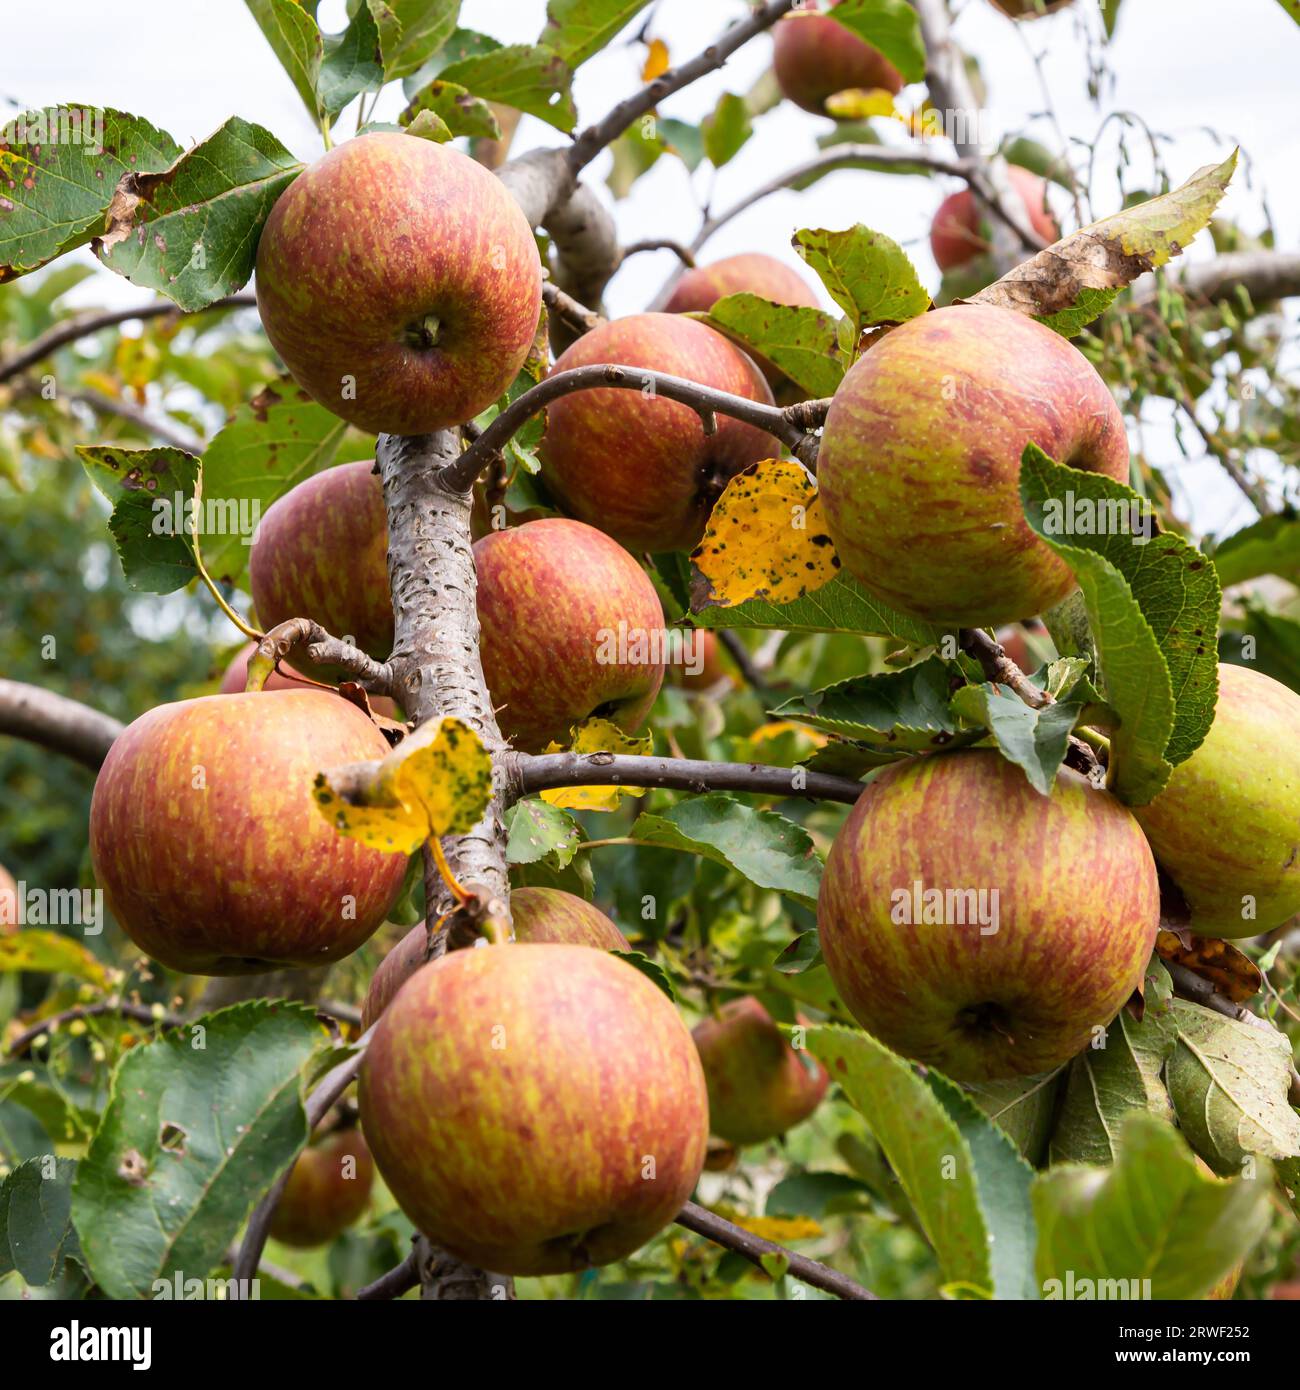 branch of ripe apples on a tree in a garden. Stock Photo